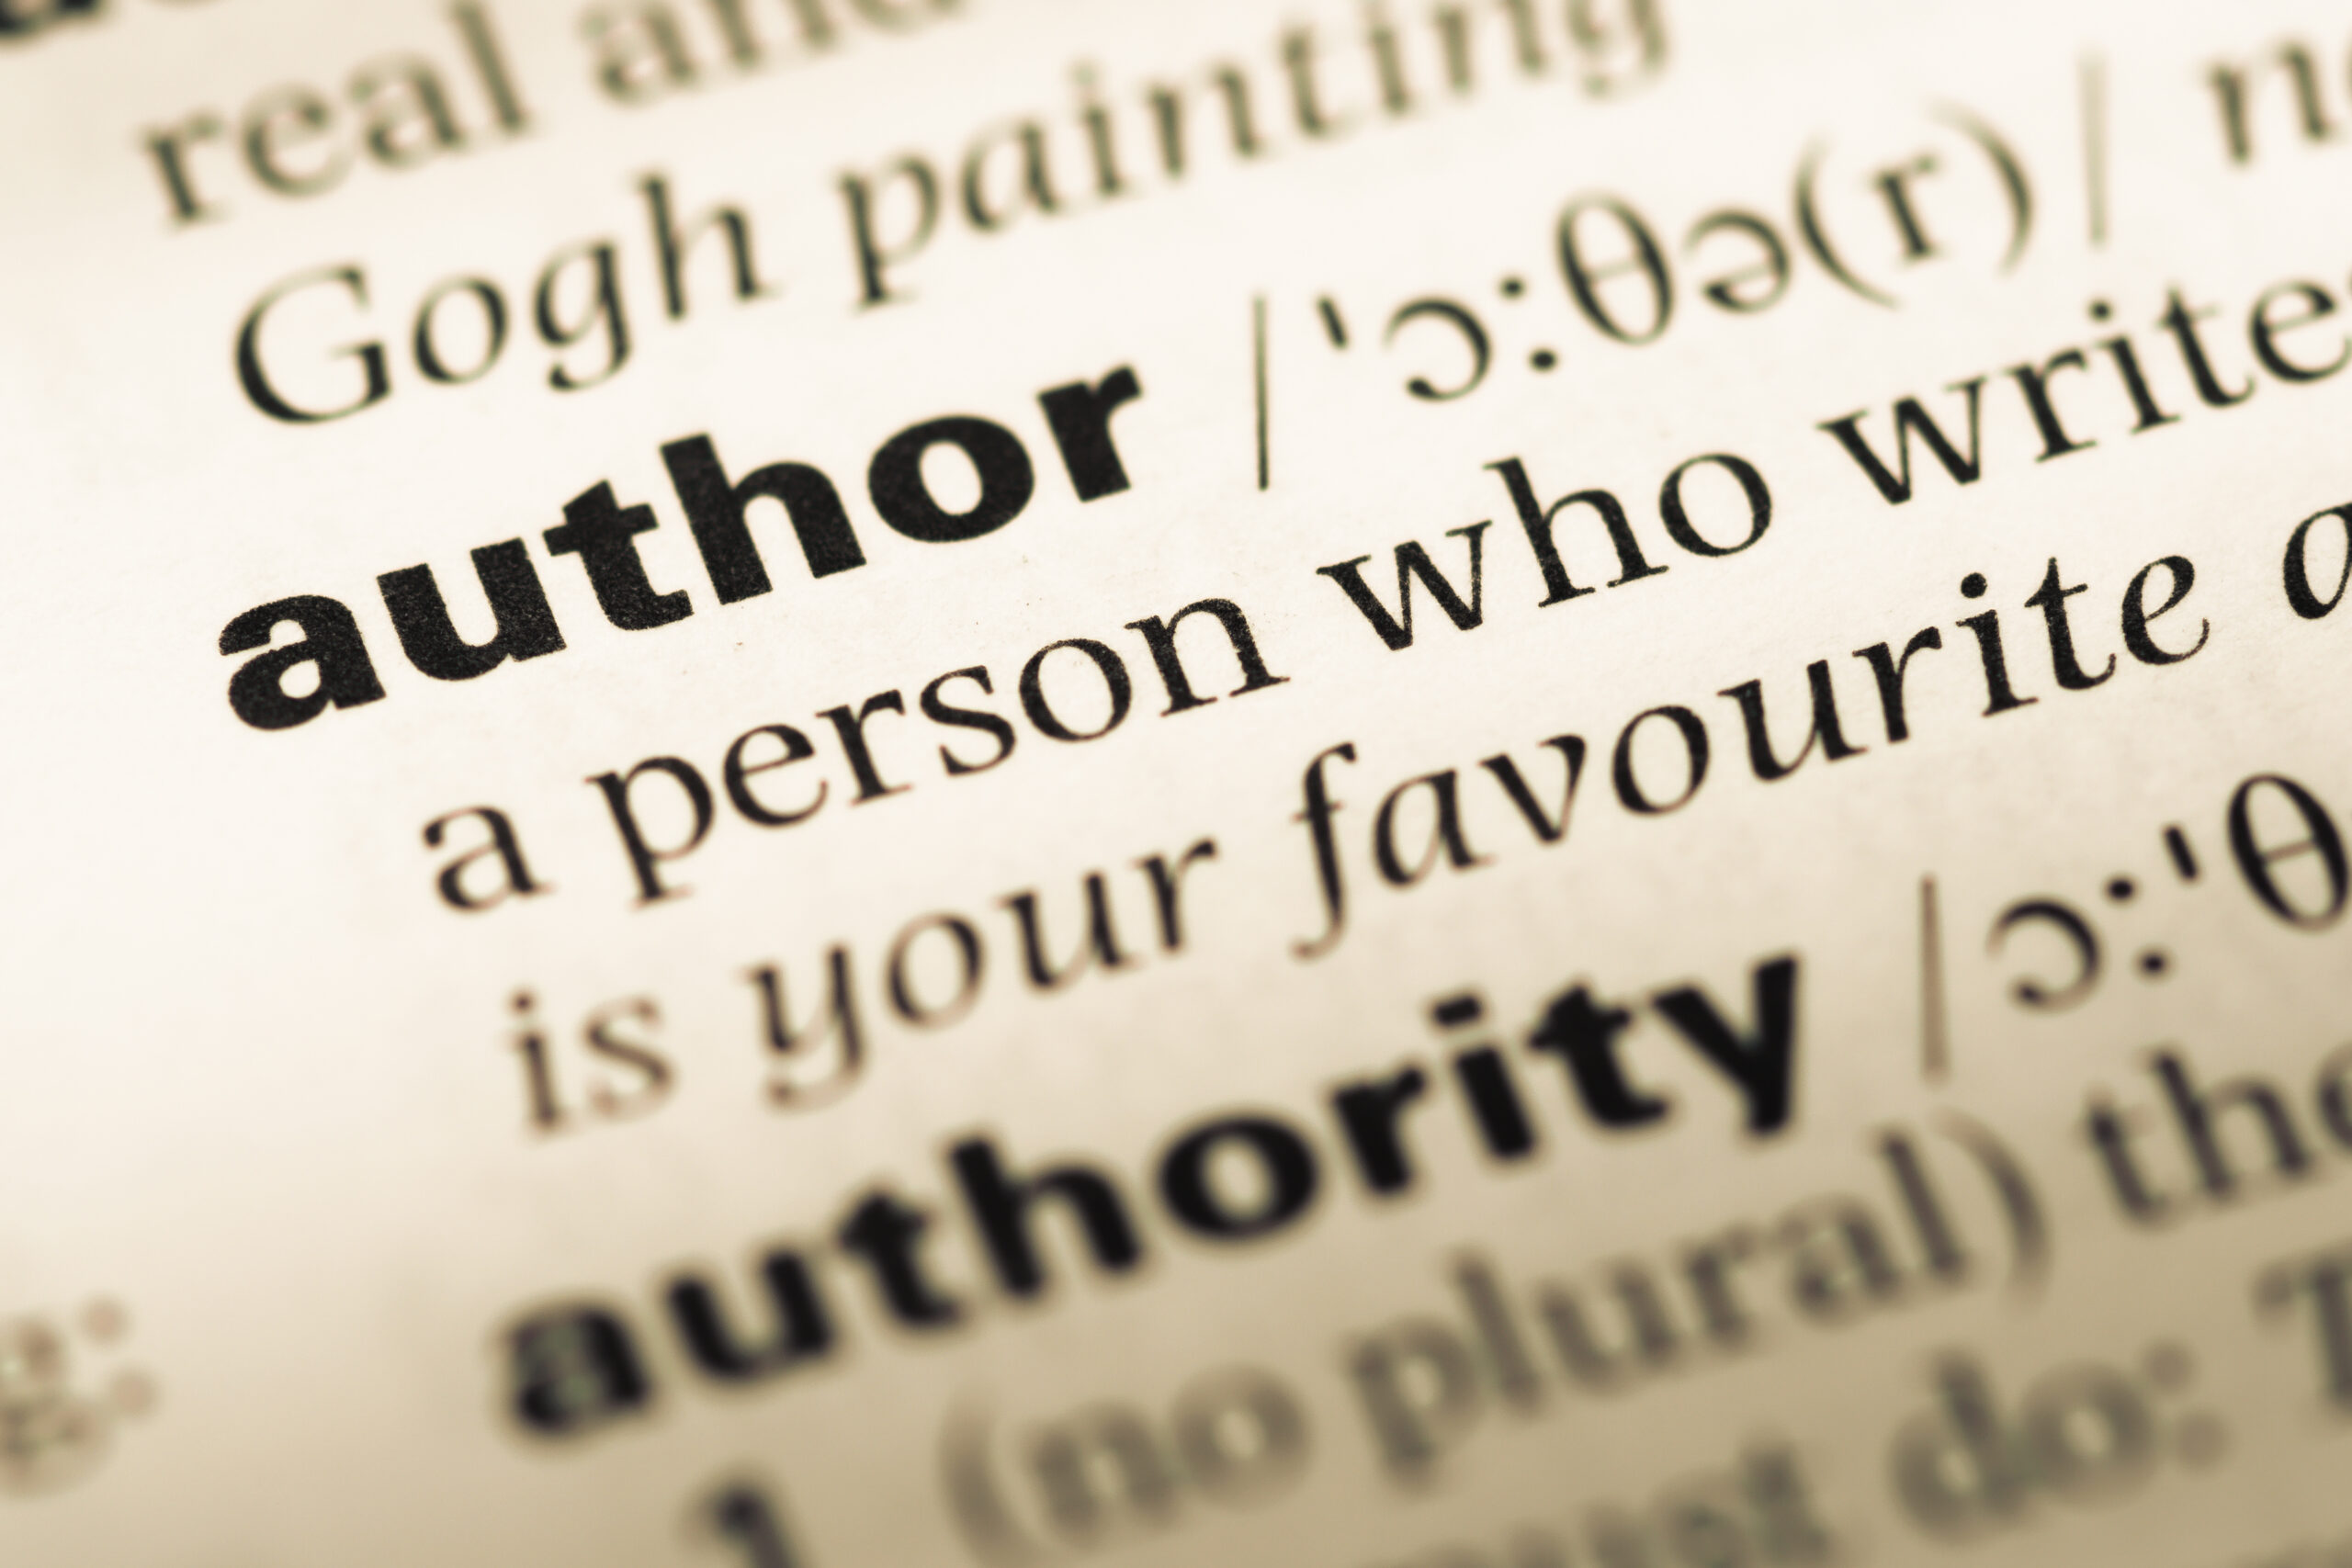 Happy National Author’s Day!